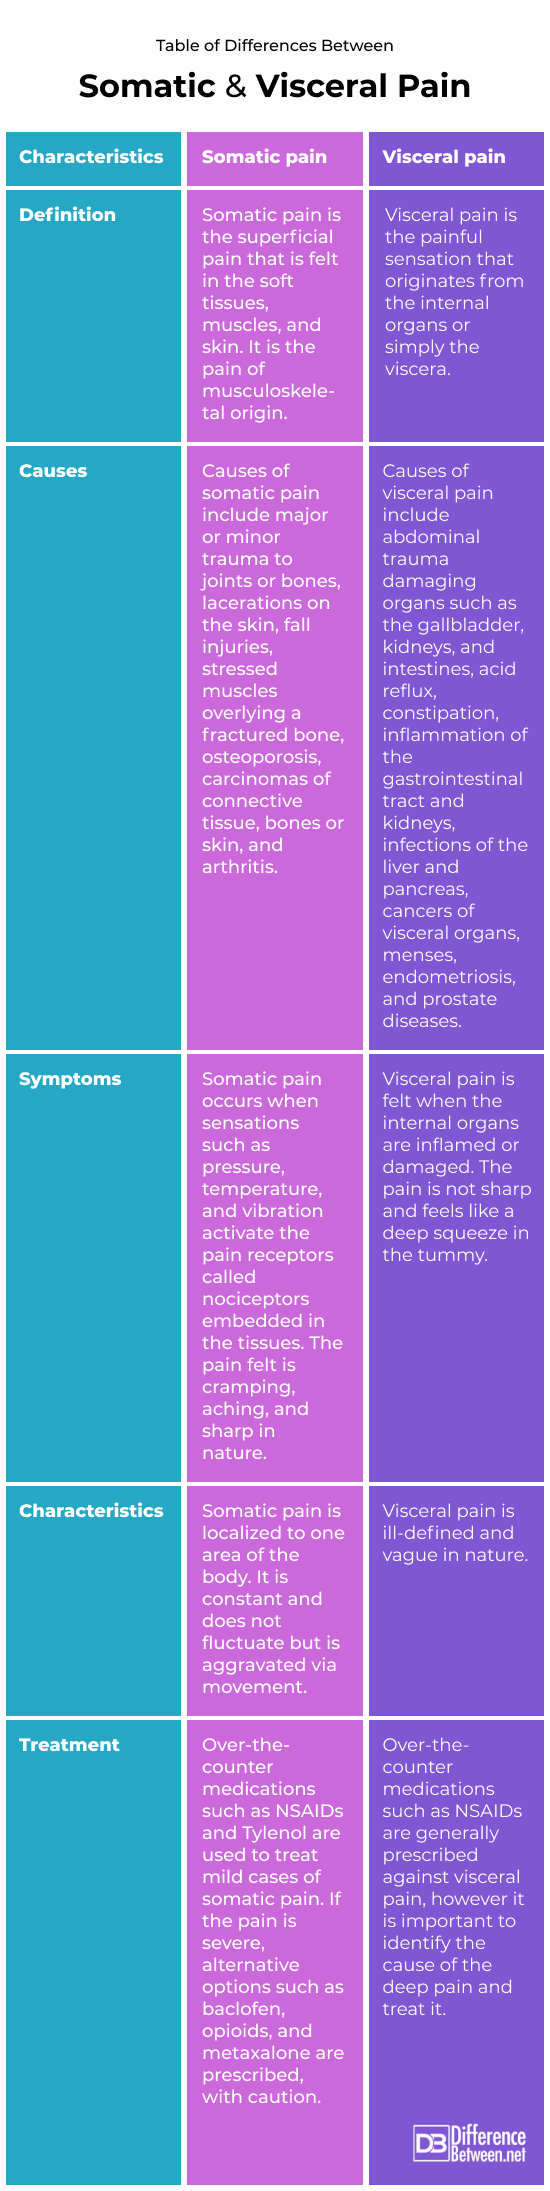 Somatic and Visceral pain